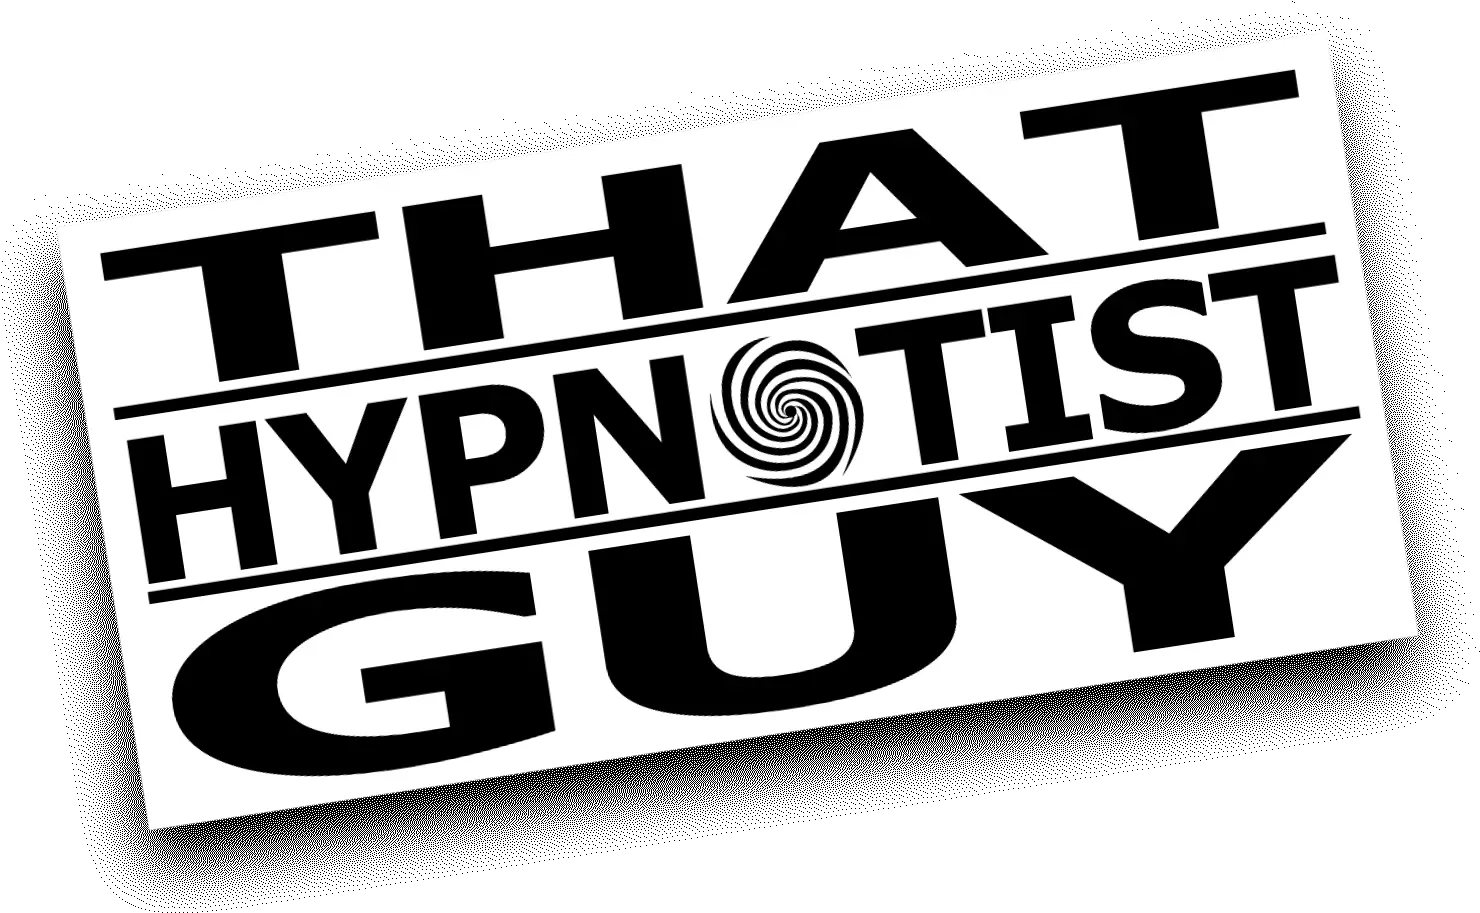 Schools U2022 That Hypnotist Guy Comedy Entertainment Sign Png Osaid Logo